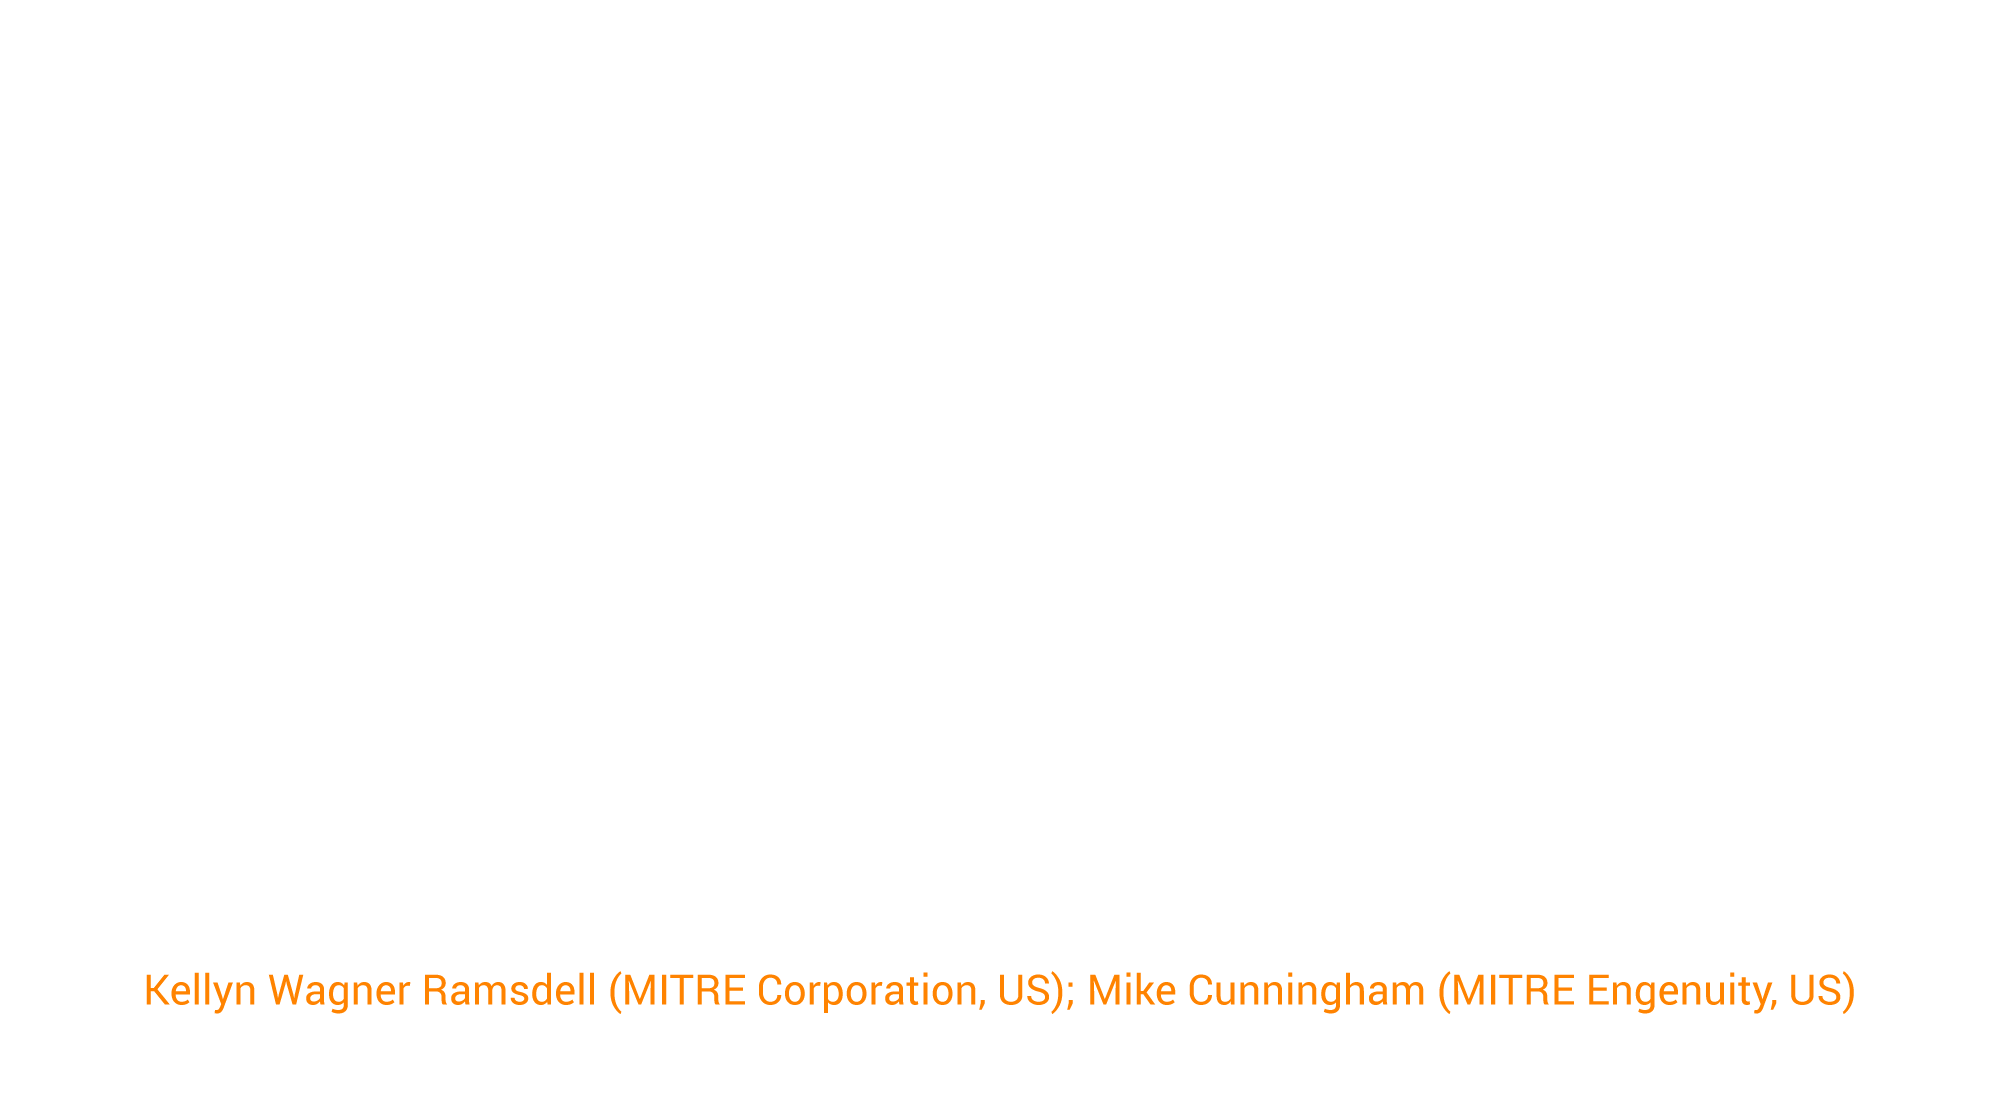 Sightings Ecosystem: A Data-driven Analysis of ATT&amp;CK in the Wild